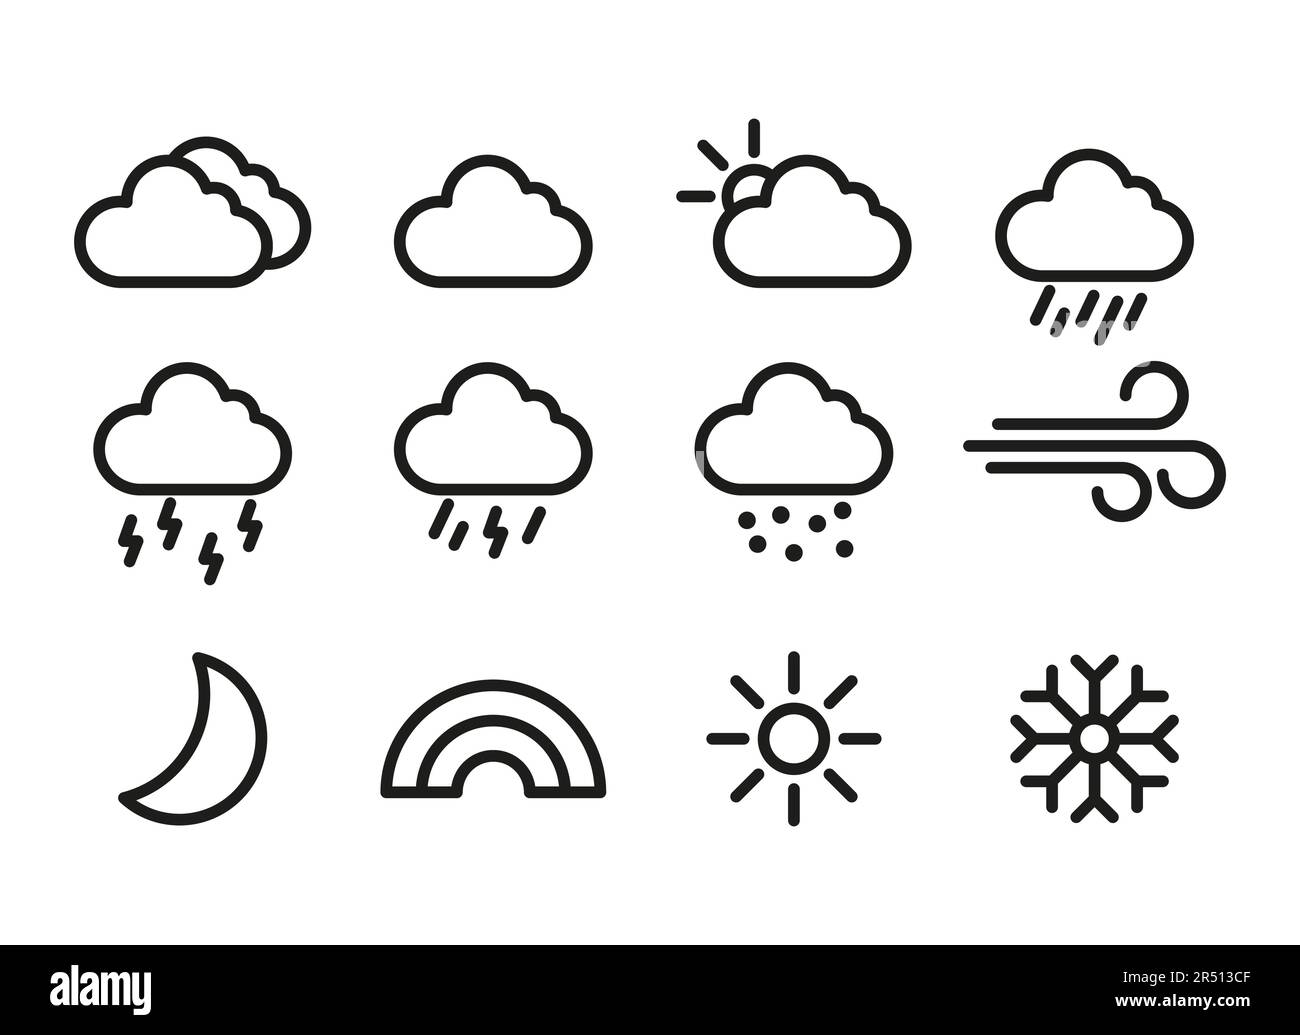 Explore a variety of weather-related vector illustrations capturing different atmospheric conditions and elements, including sunny days, cloudy skies, Stock Vector